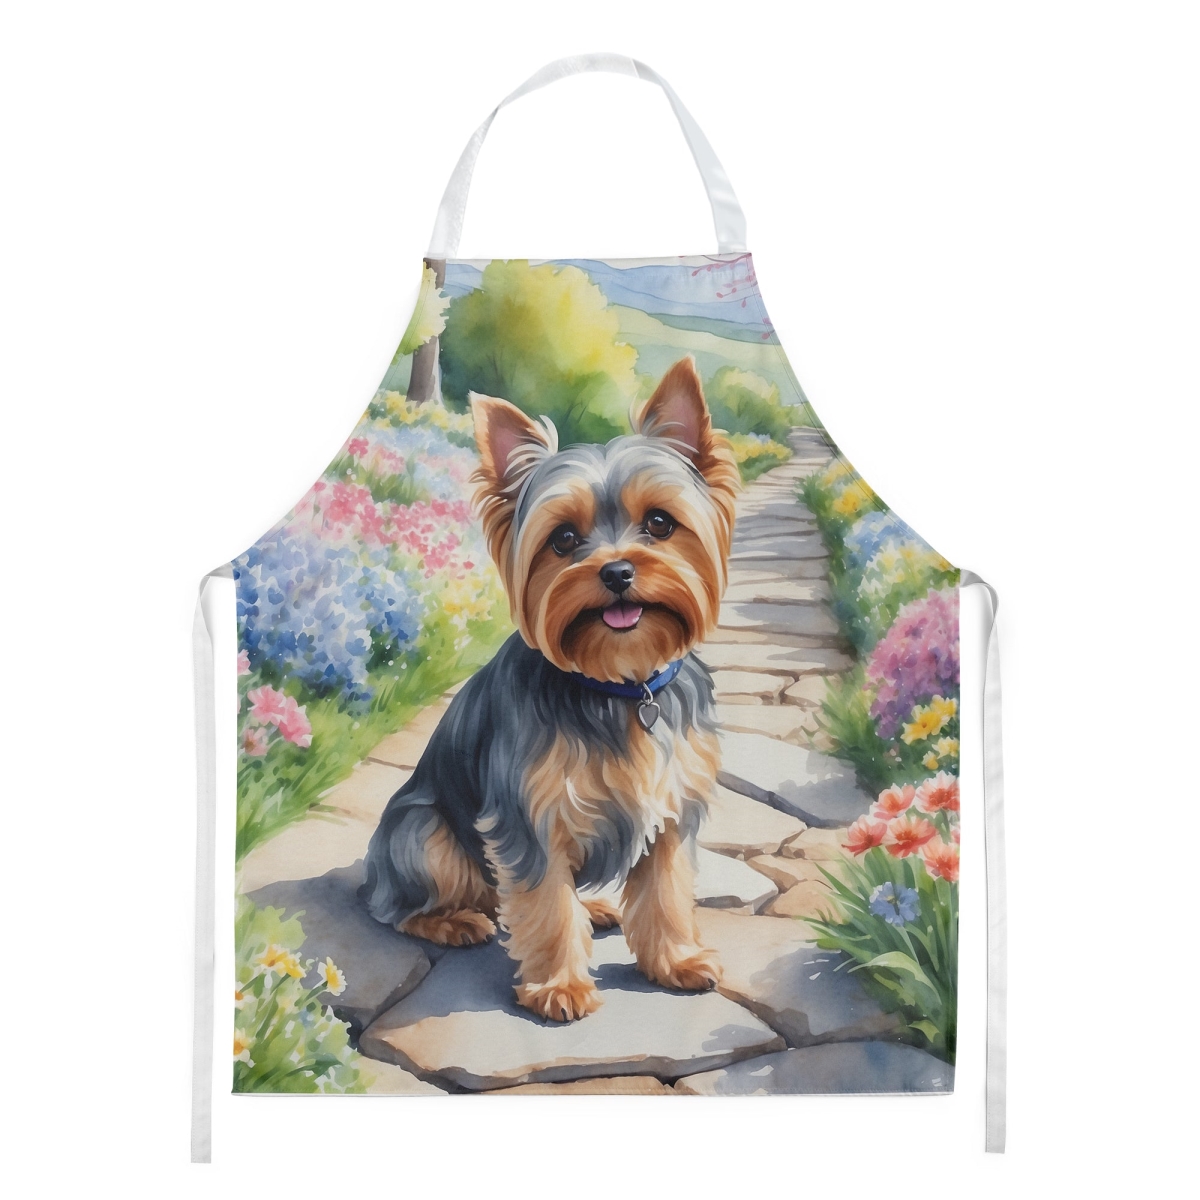 Picture of Carolines Treasures DAC6735APRON 30 x 27 in. Unisex Yorkshire Terrier Spring Path Apron